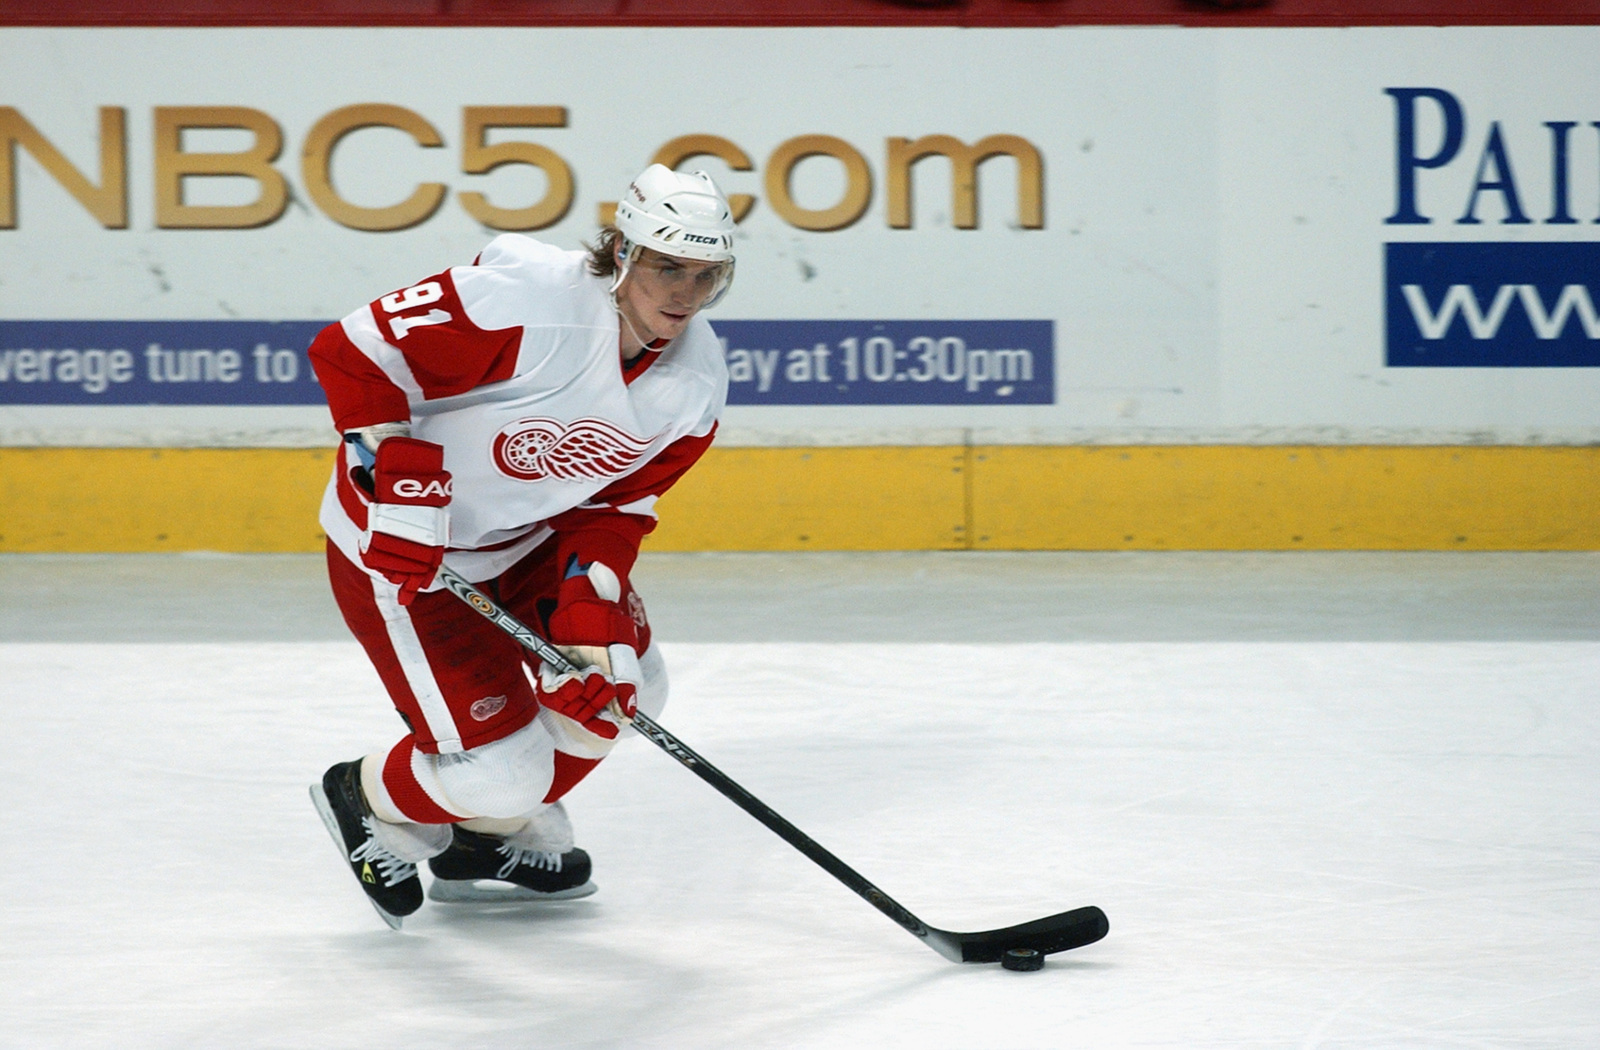 Report: Former Red Wing Sergei Fedorov to retire and become GM of